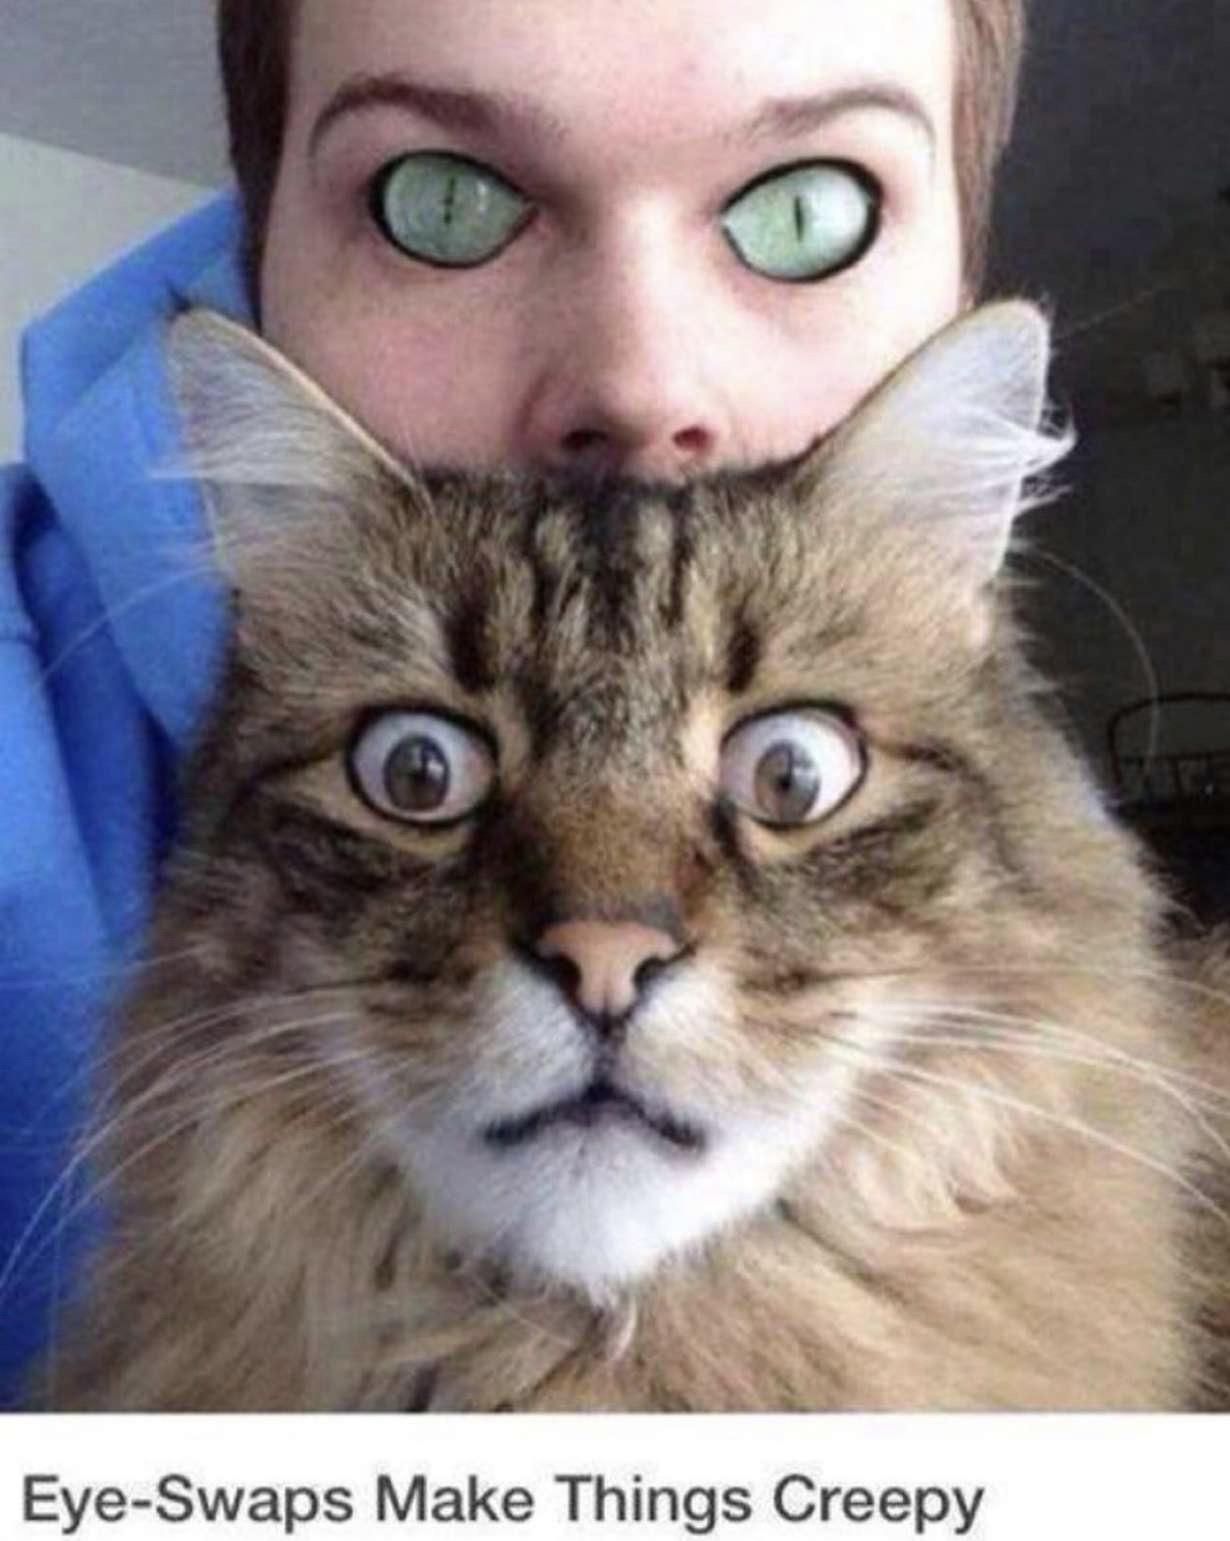 if we had cat eyes and they had human eyes... scary.